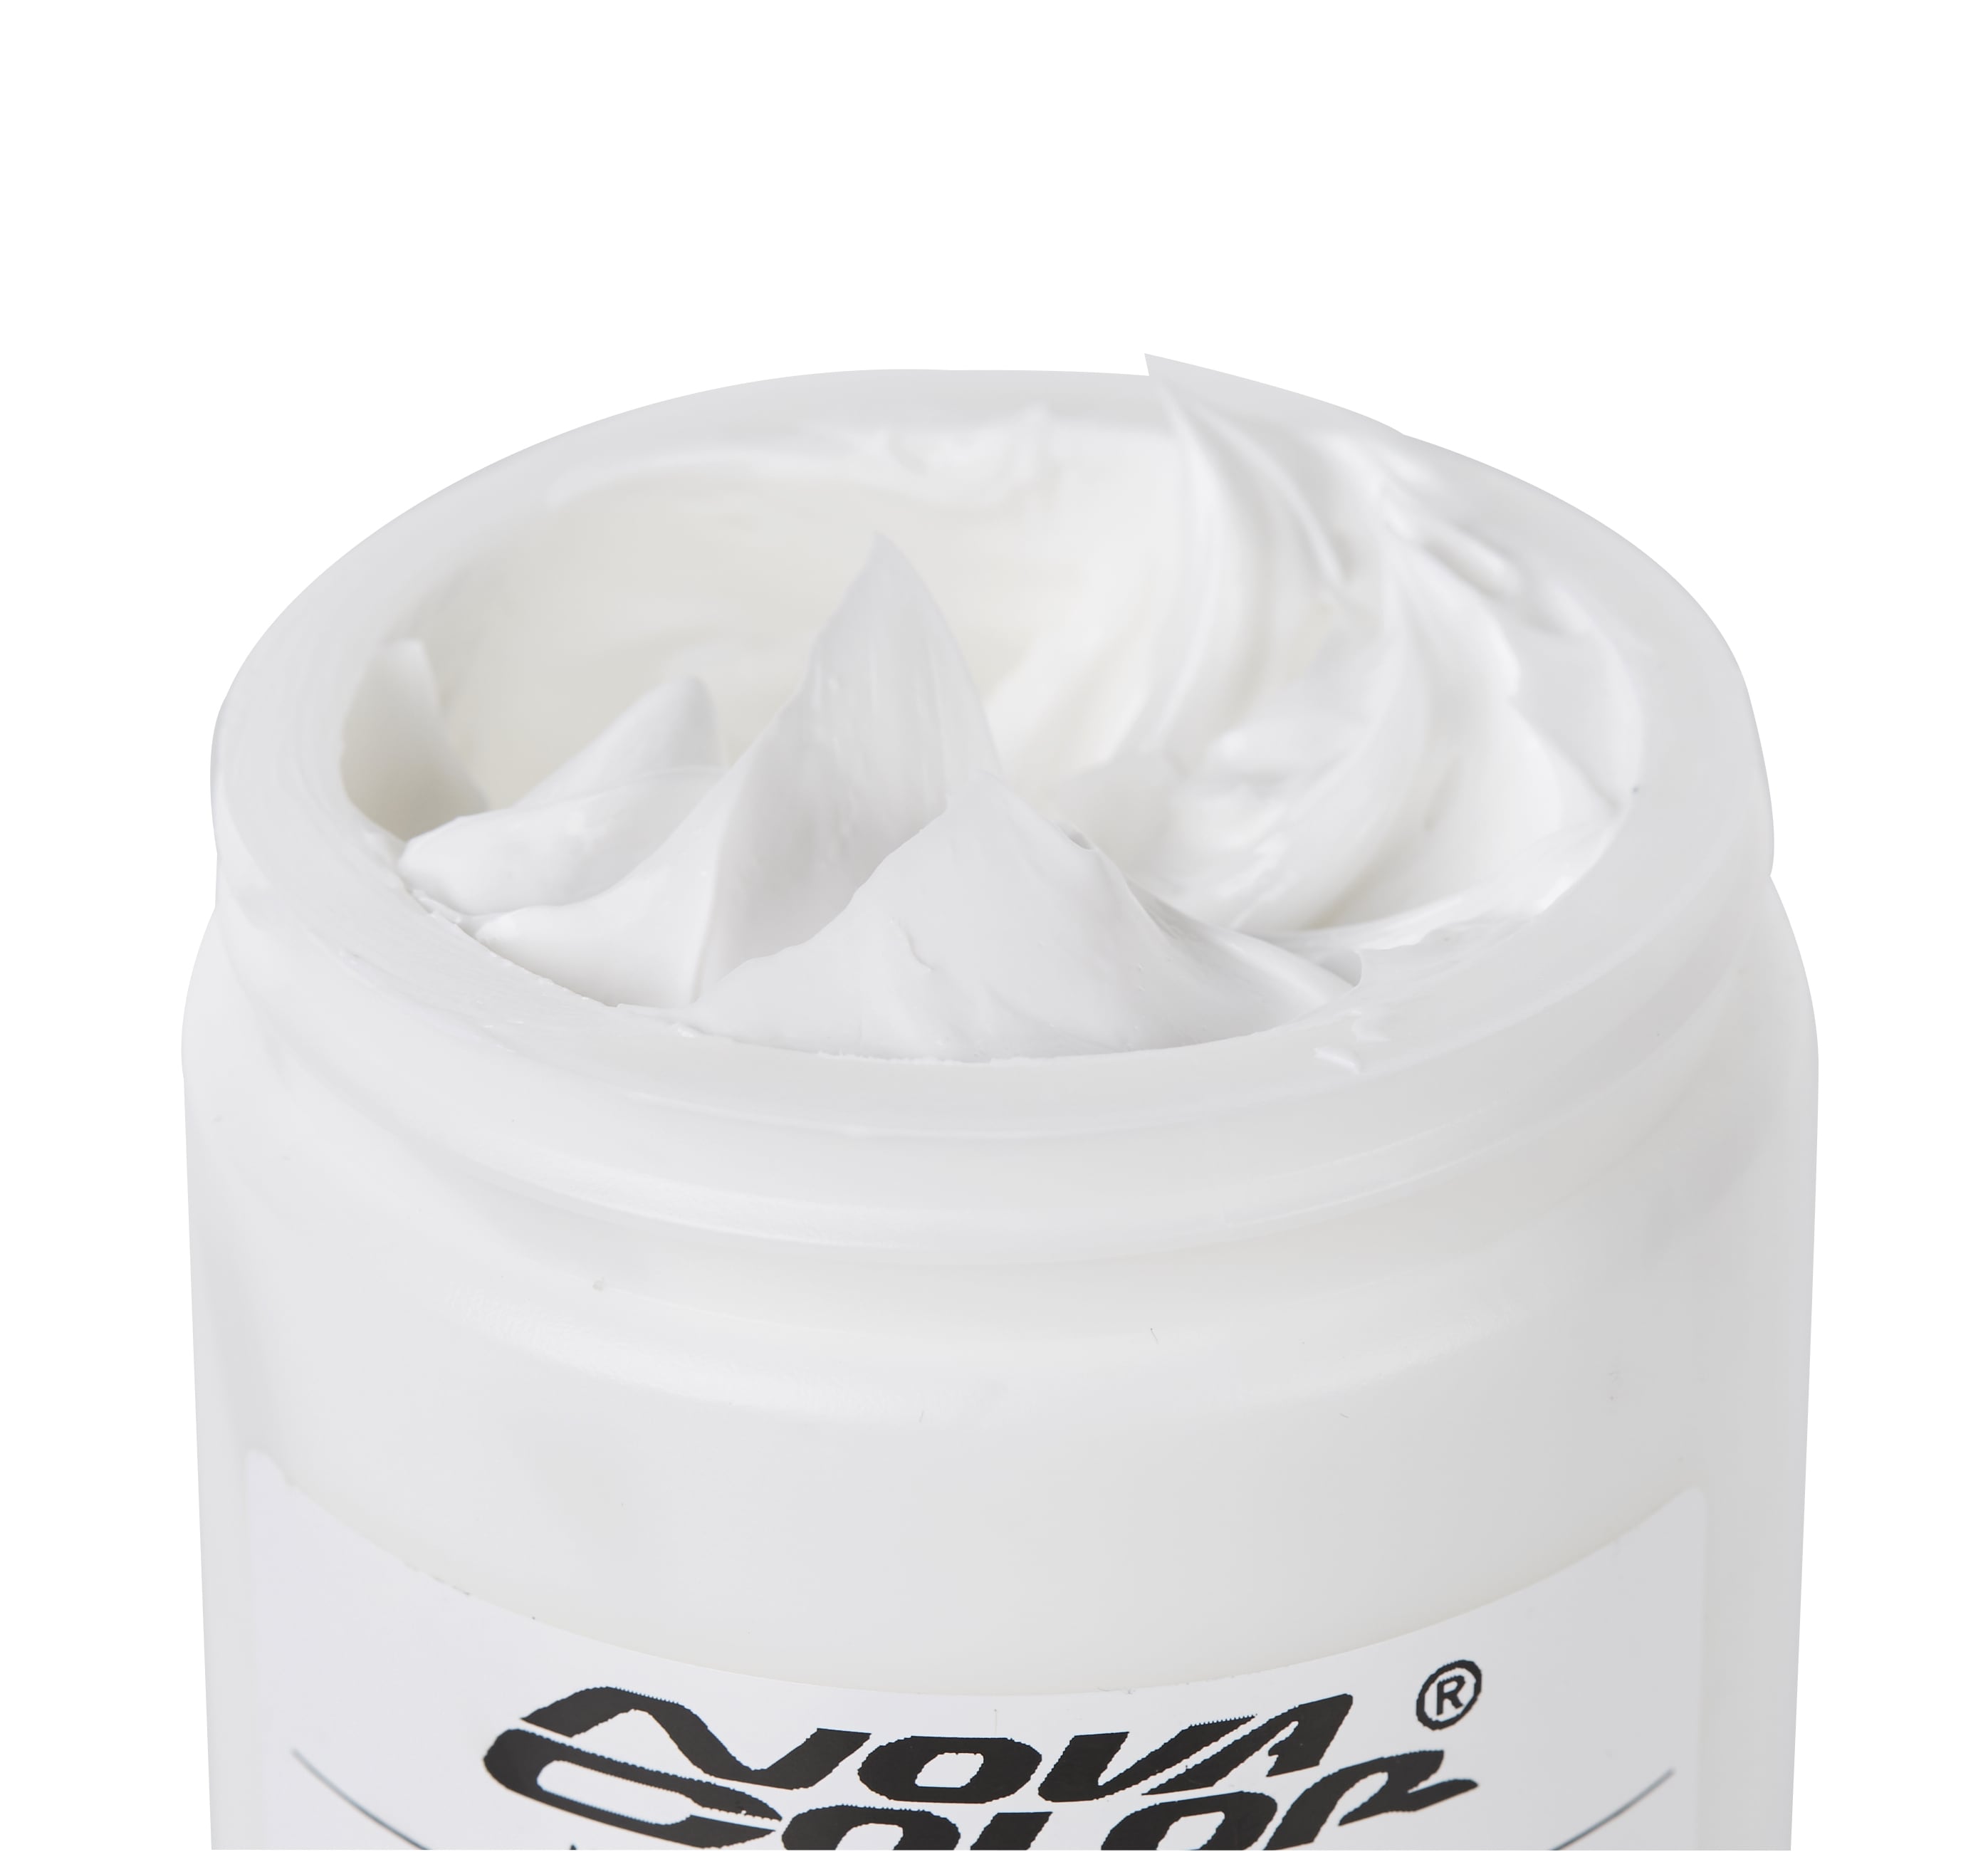 White Light and Fluffy Acrylic Modeling Texture Paste